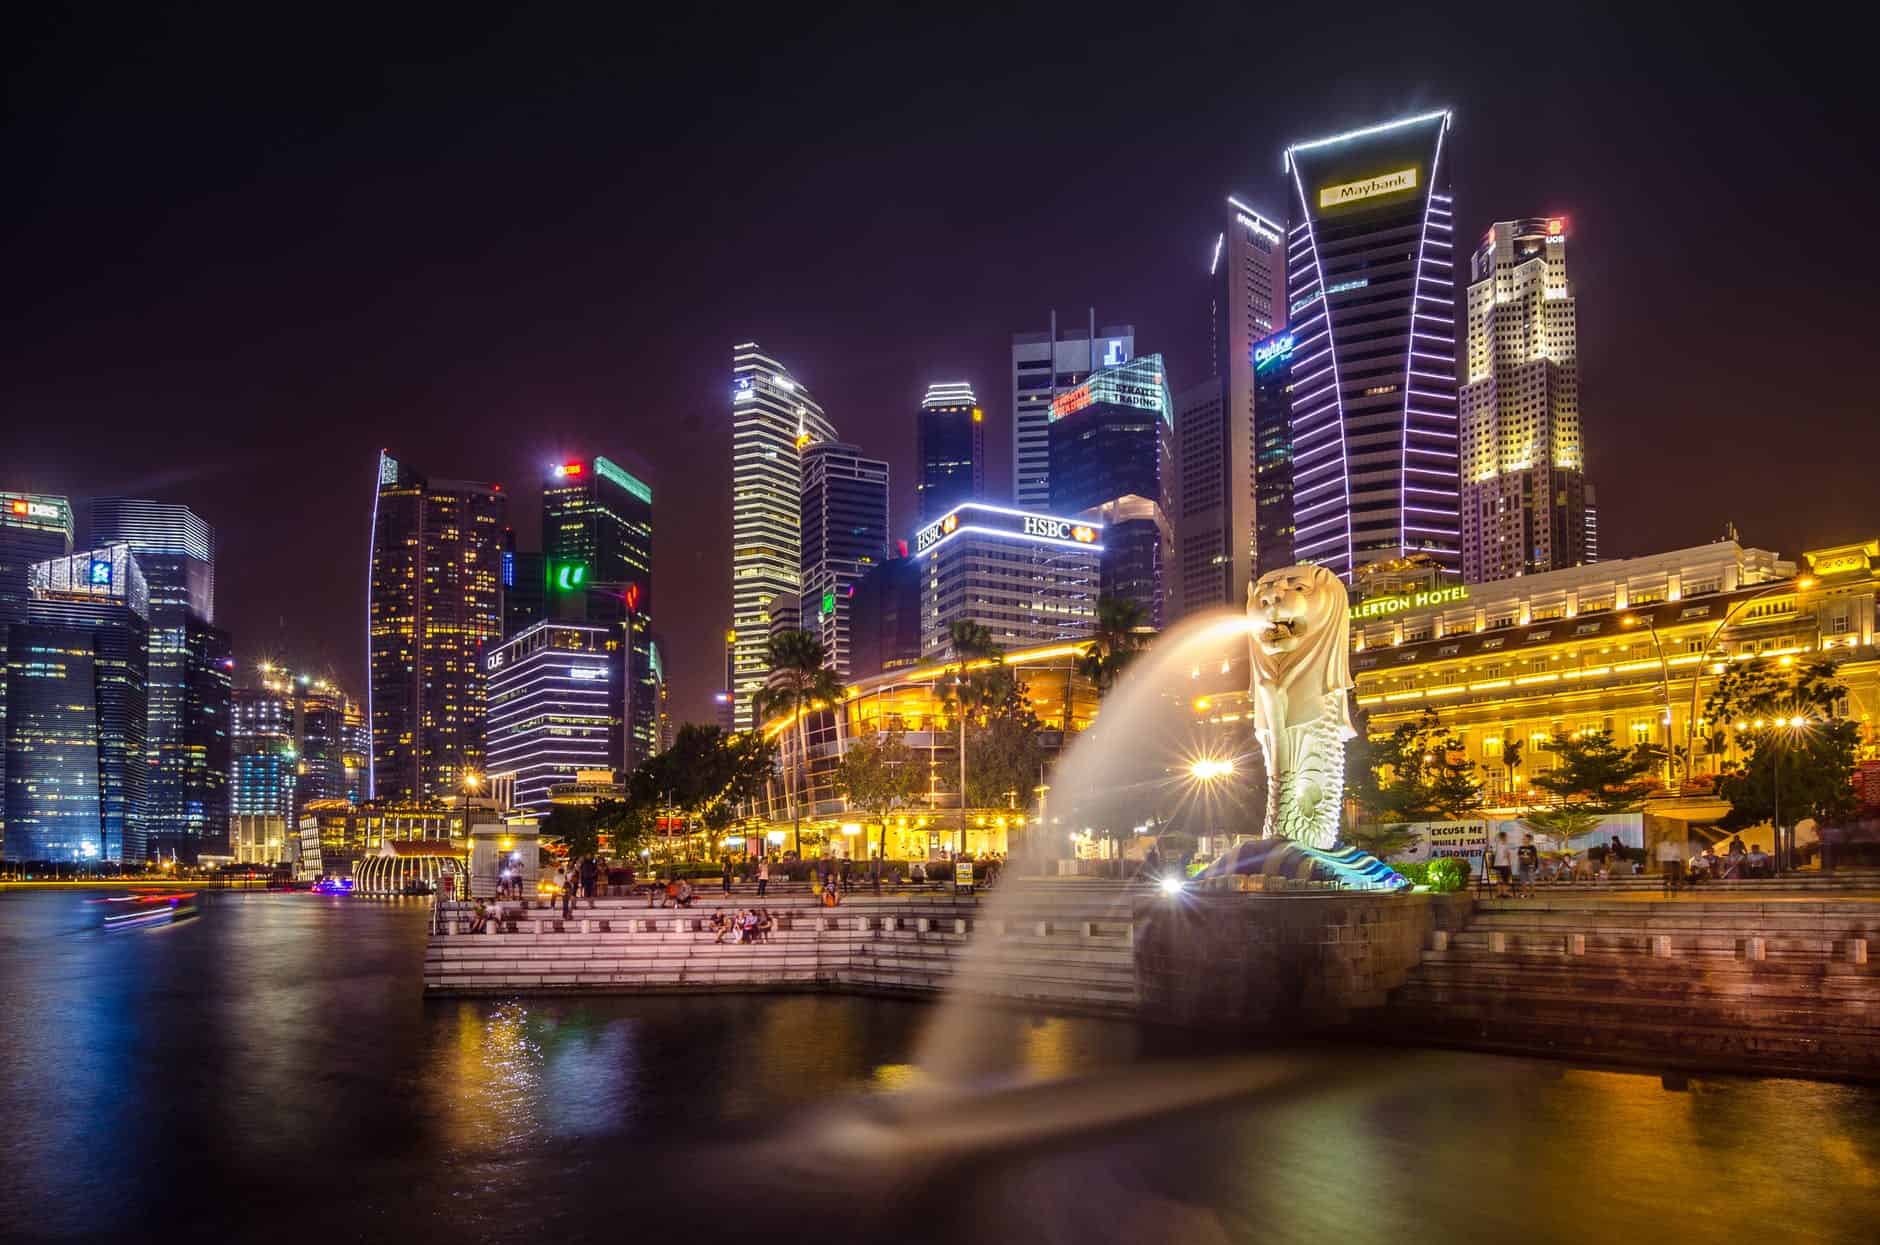 Singapore is one of the top travel destinations for people with disabilities